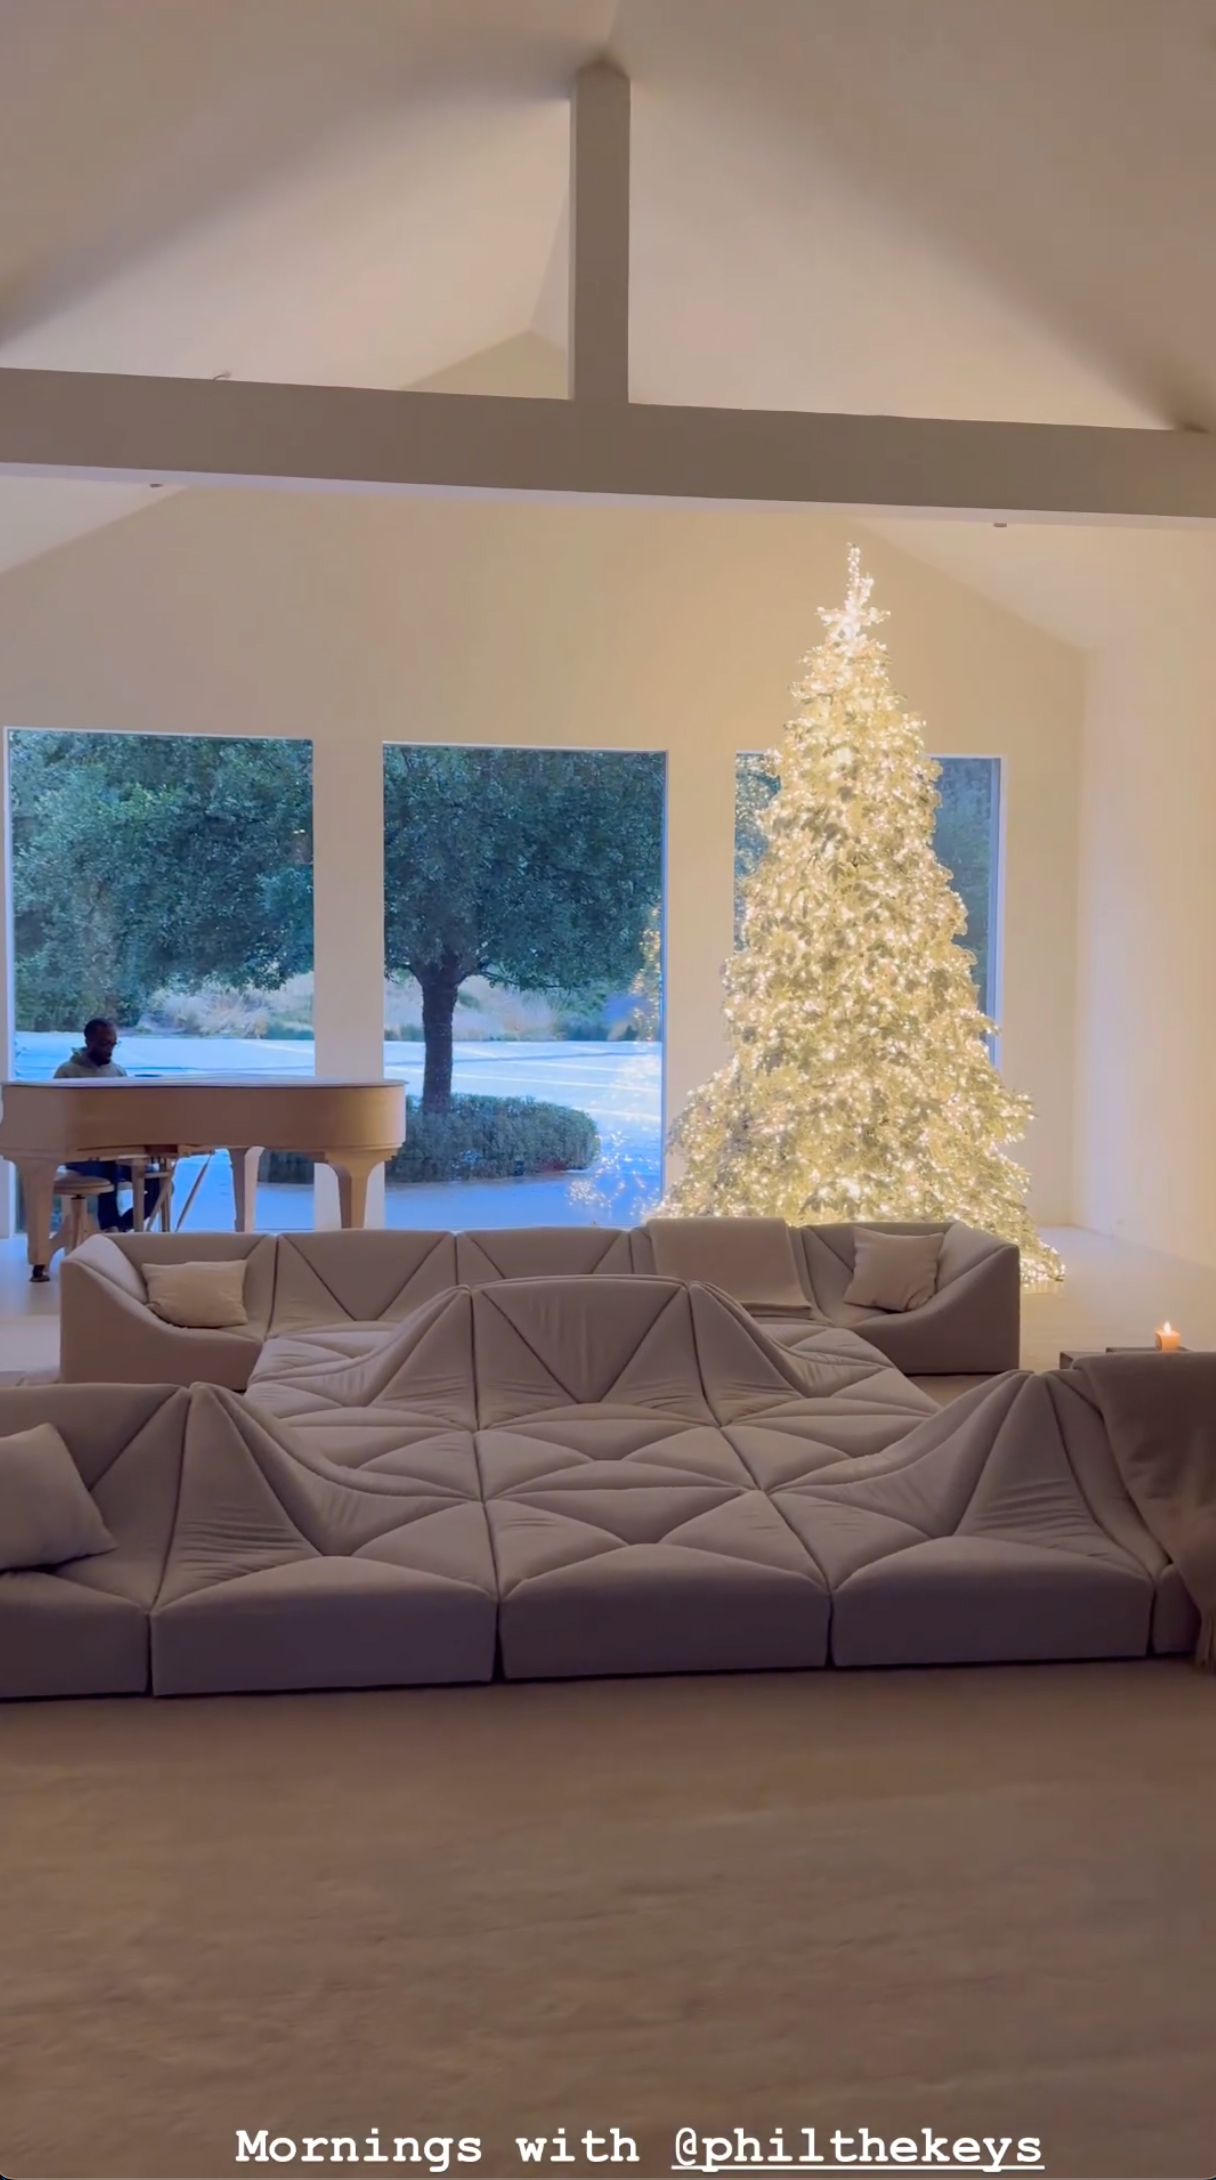 The Kardashians star showed off her huge Christmas tree and piano player